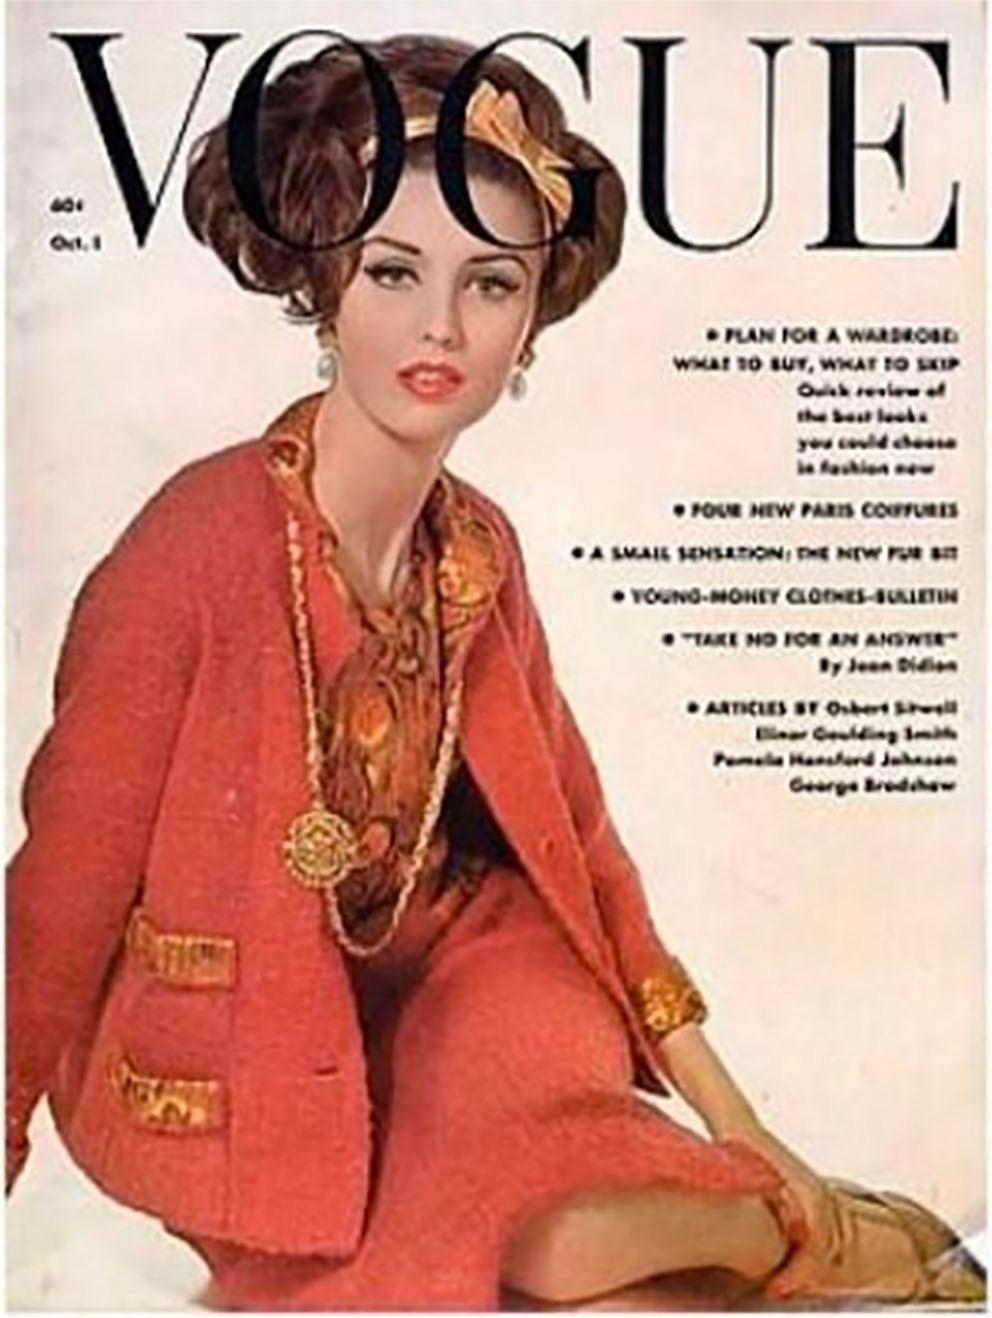 1961 Very rare Haute Couture Chanel silk top featuring back snap opening, with decorative buttons, a silk lurex ethnic pattern, a silk lining.
See attached French Vogue and French Elle covers, also shoot in Chanel saloon.
The label Chanel is missing